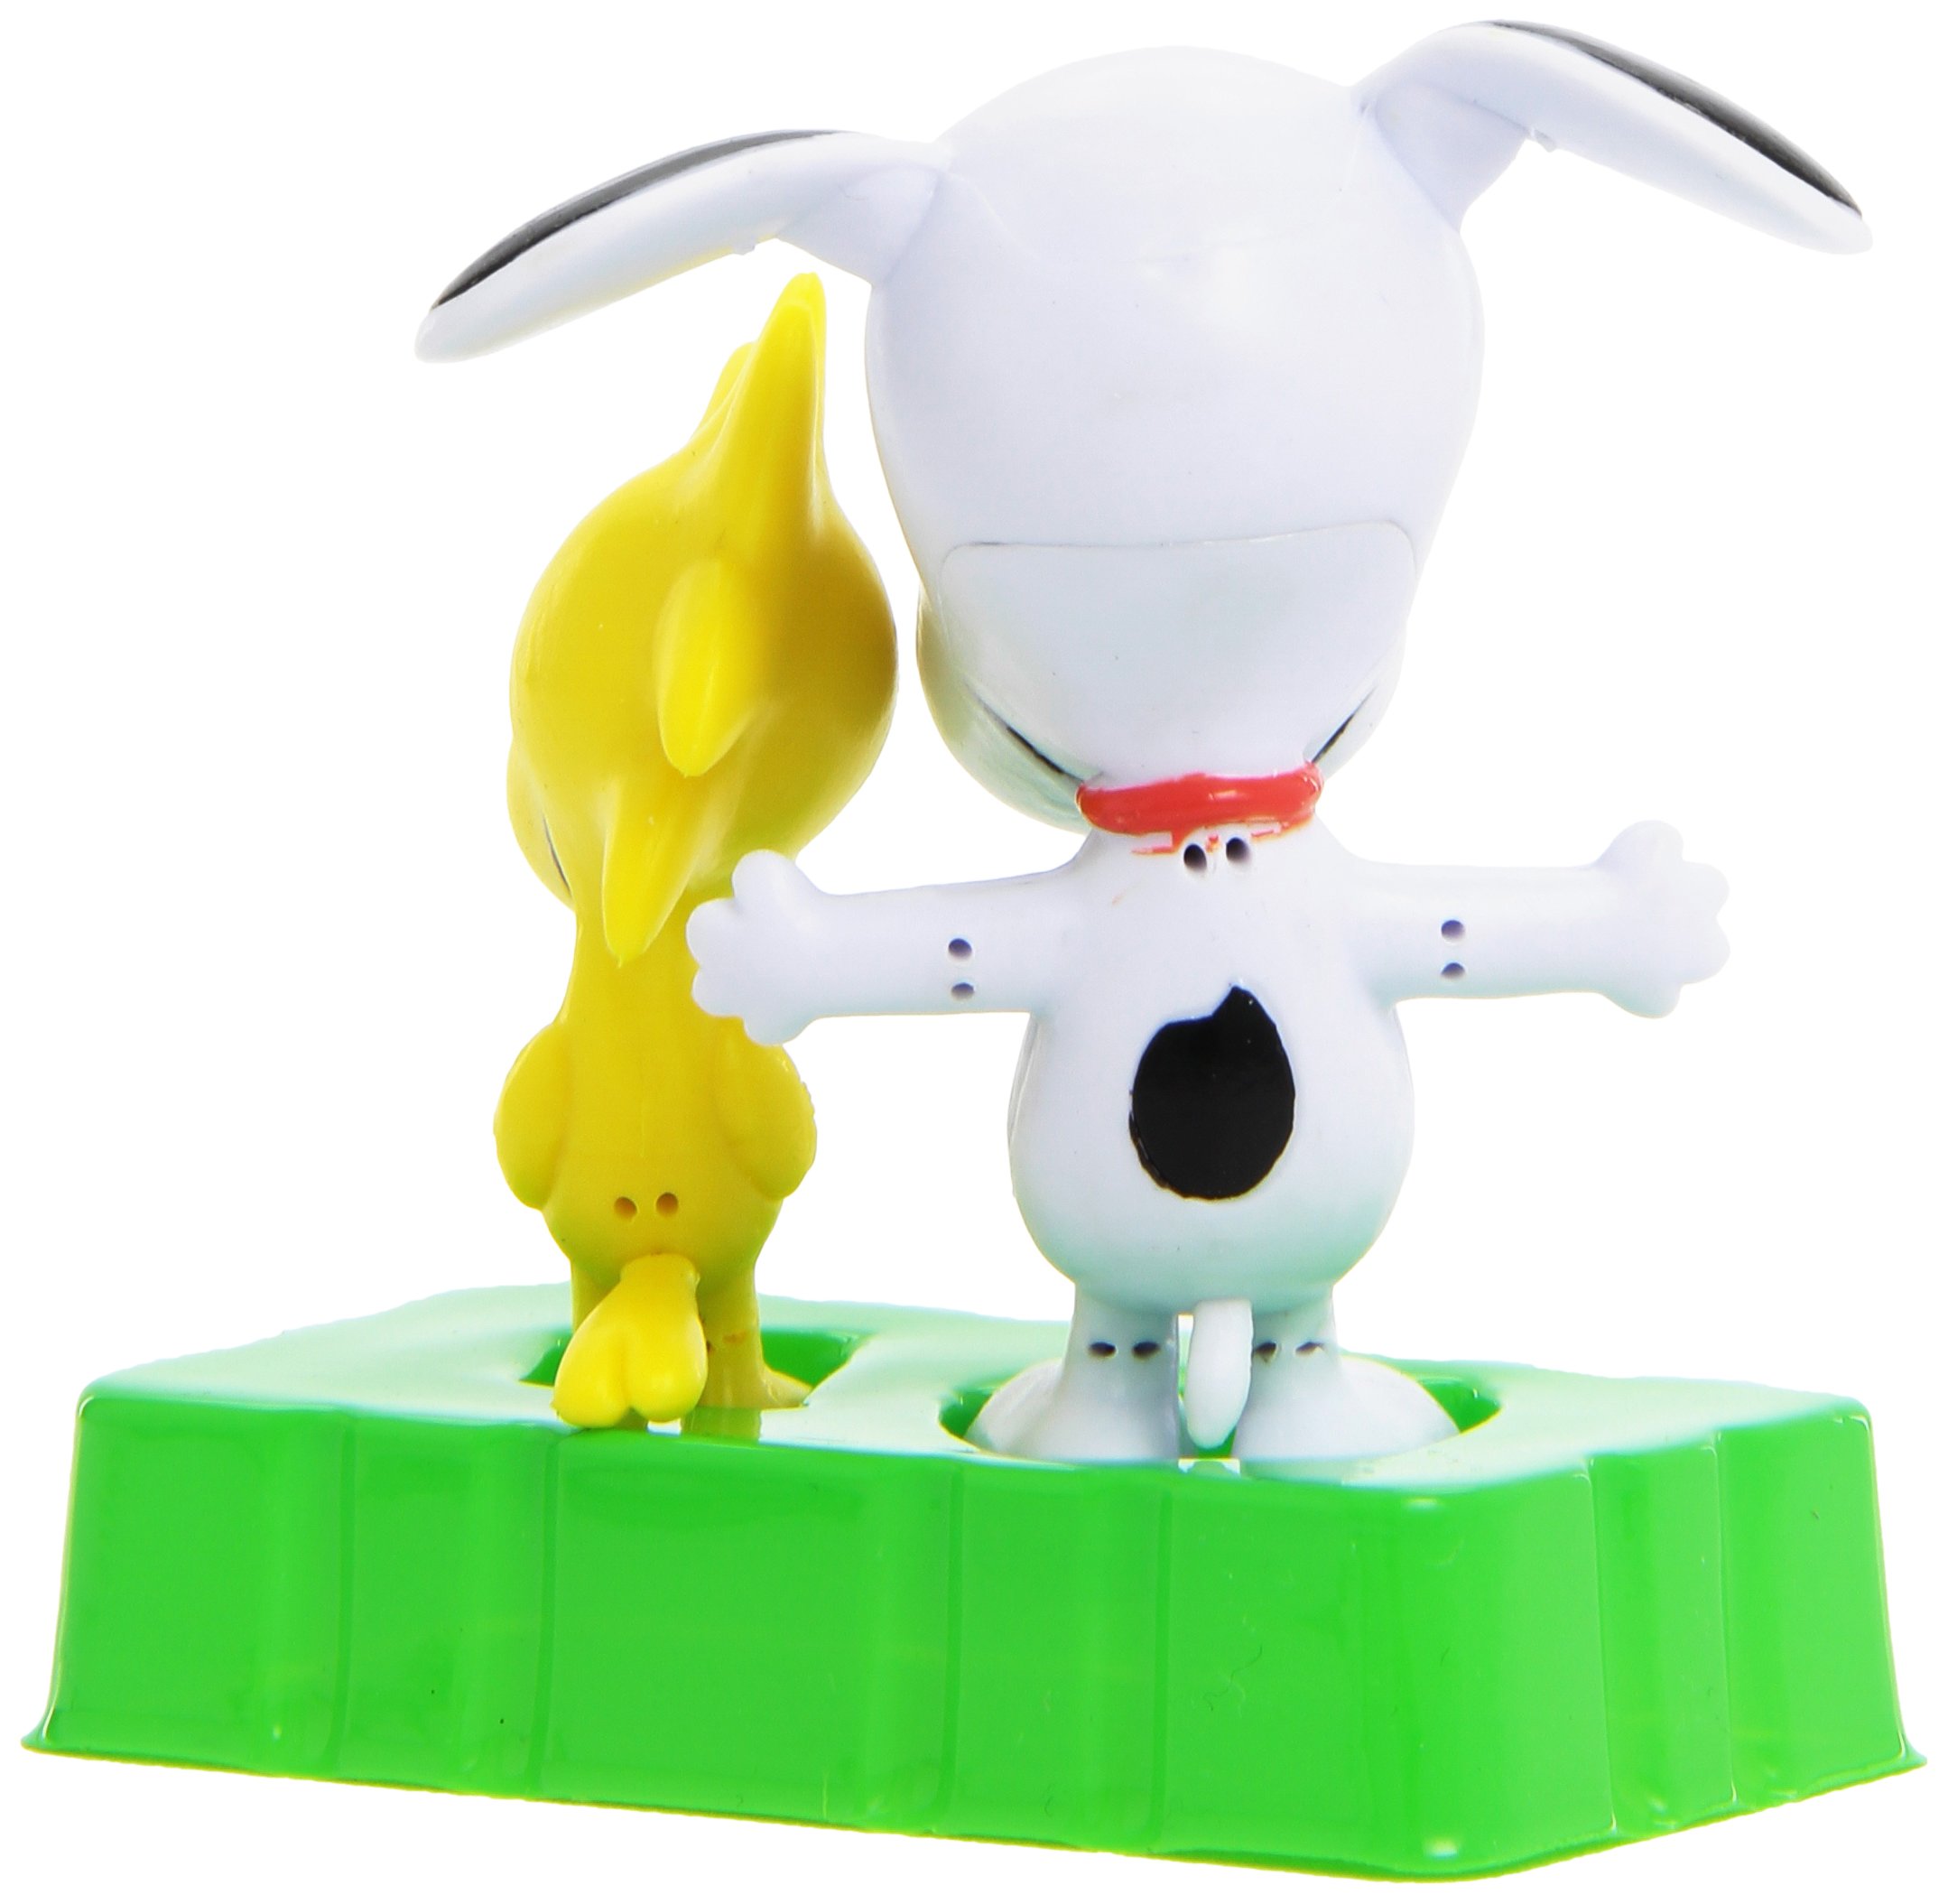 Snoopy and Woodstock | Charles M. Schulz